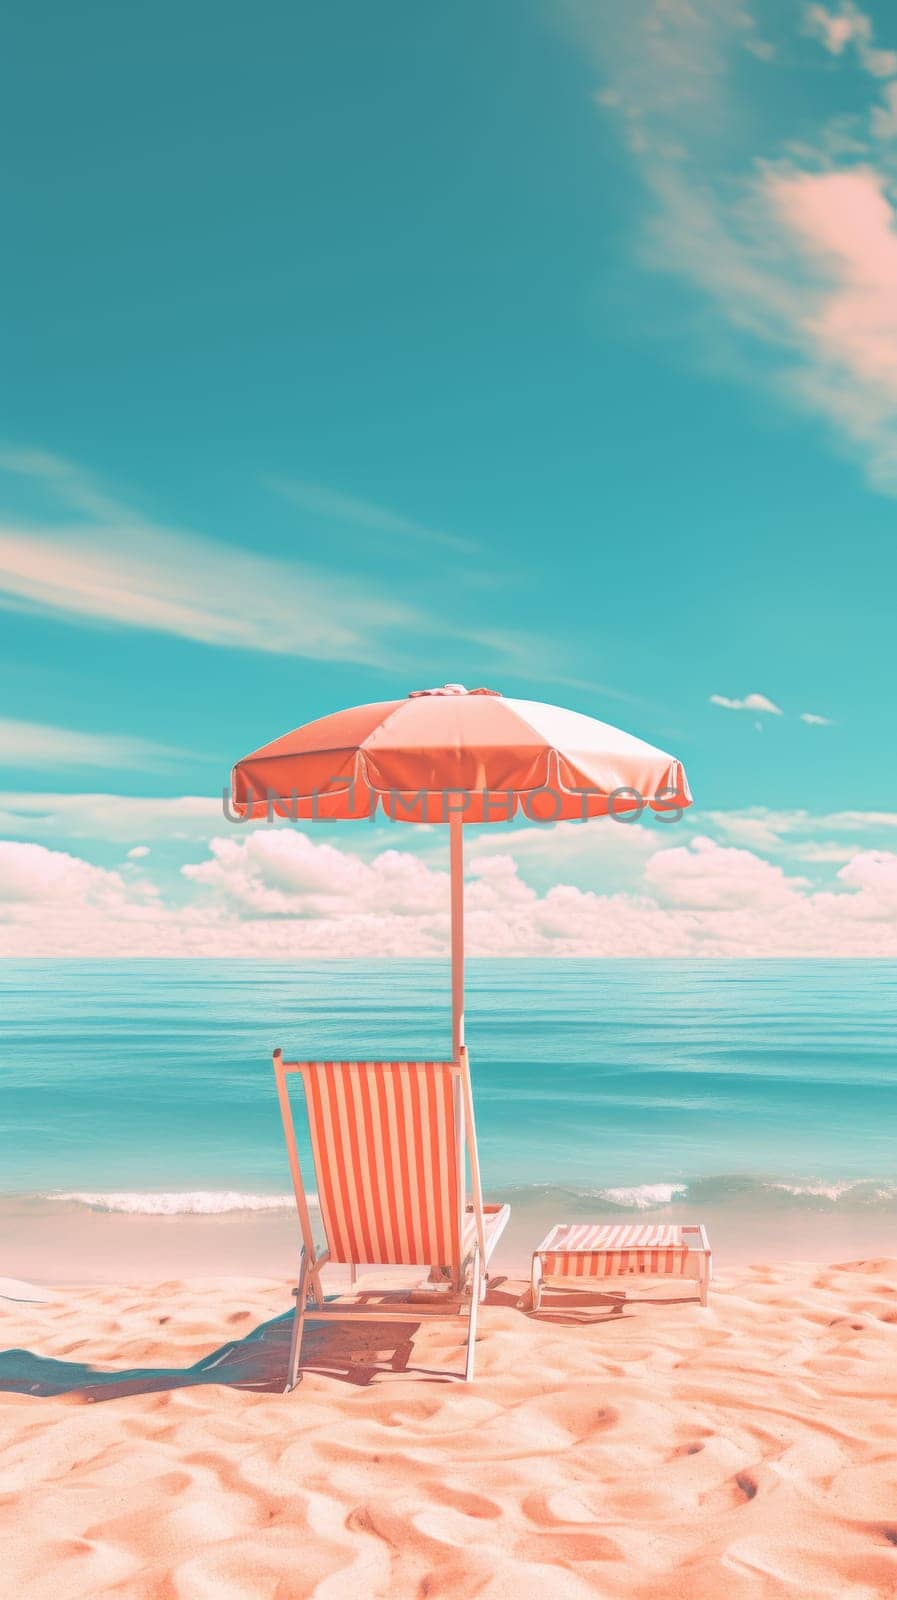 A beach chair and umbrella on the sand with a view of ocean